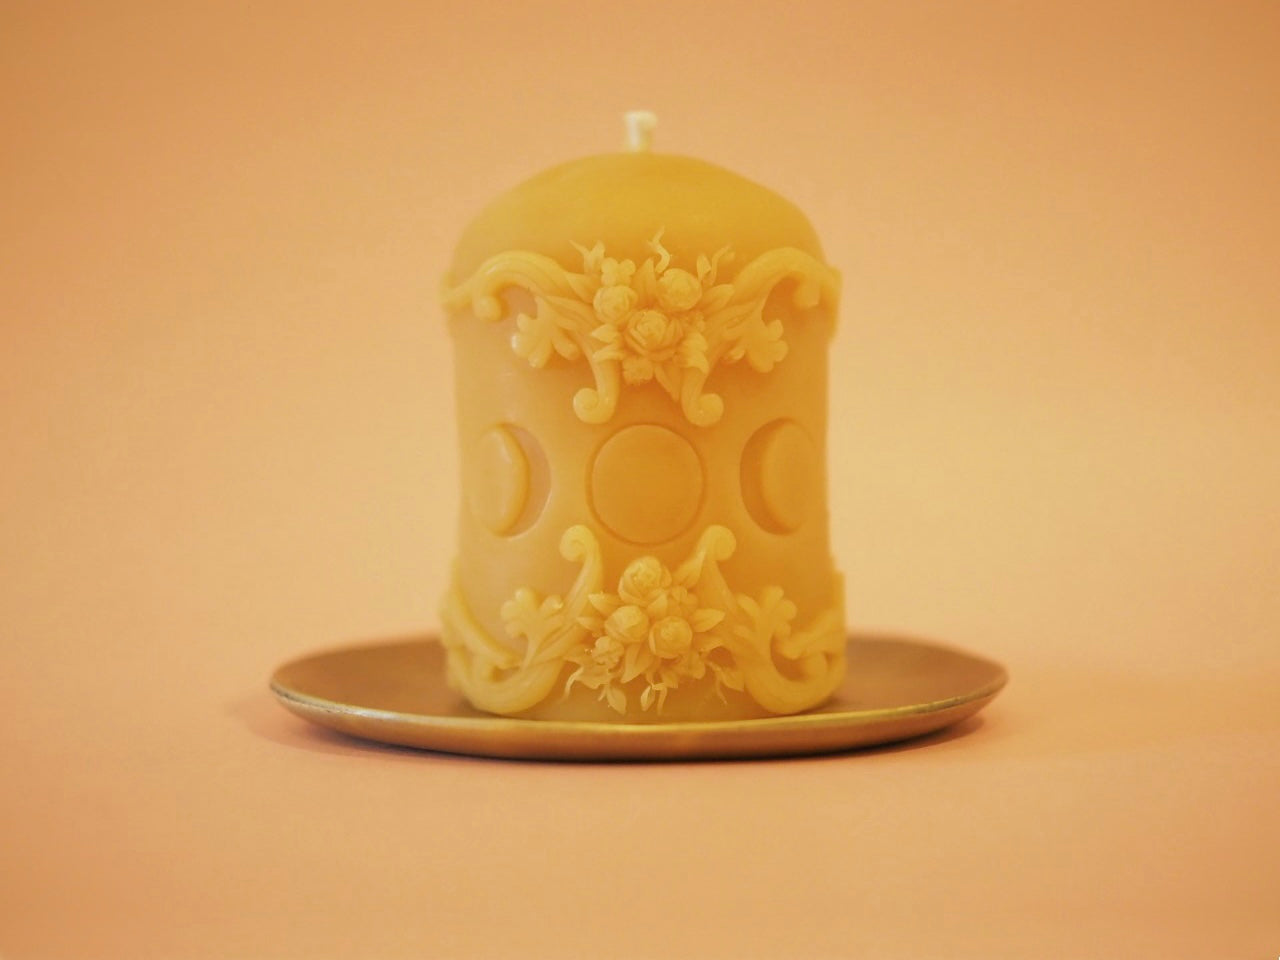 Till Blush Of Night hand-poured beeswax and pure essential oil pillar candle in Moon Cycles scent front view